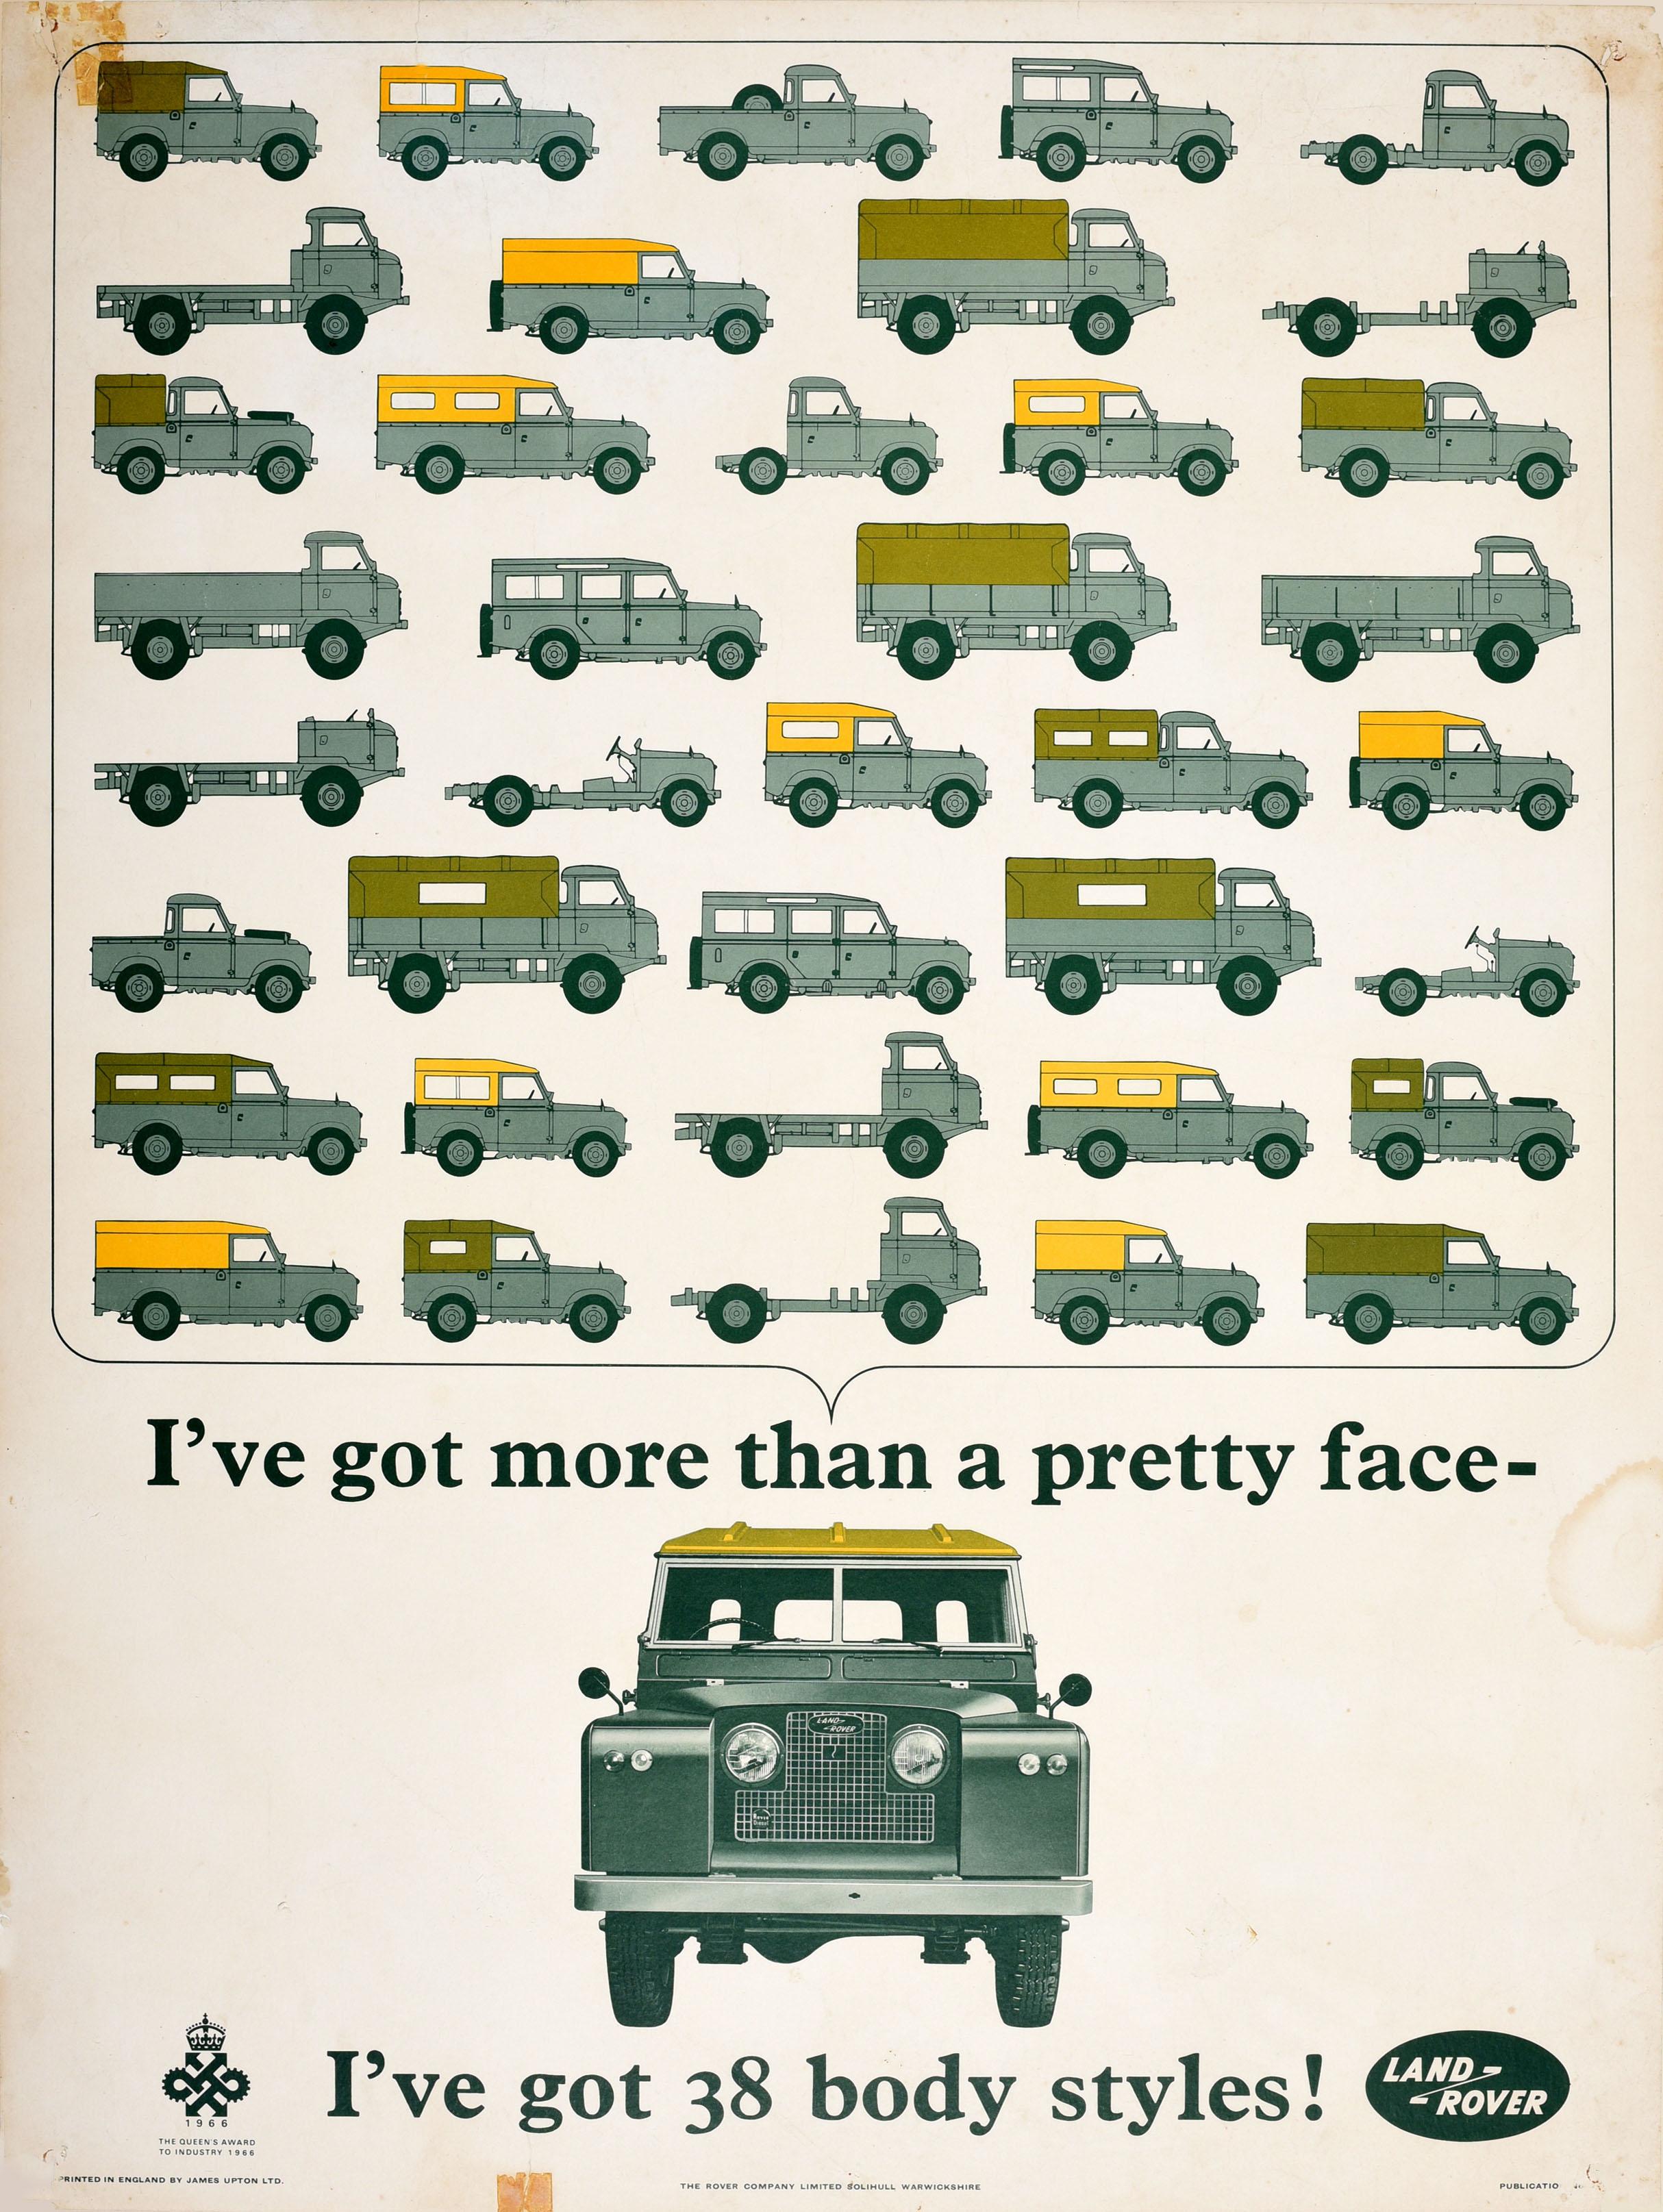 Unknown Print - Original Vintage Poster Land Rover More Than A Pretty Face 38 Body Styles Jeep